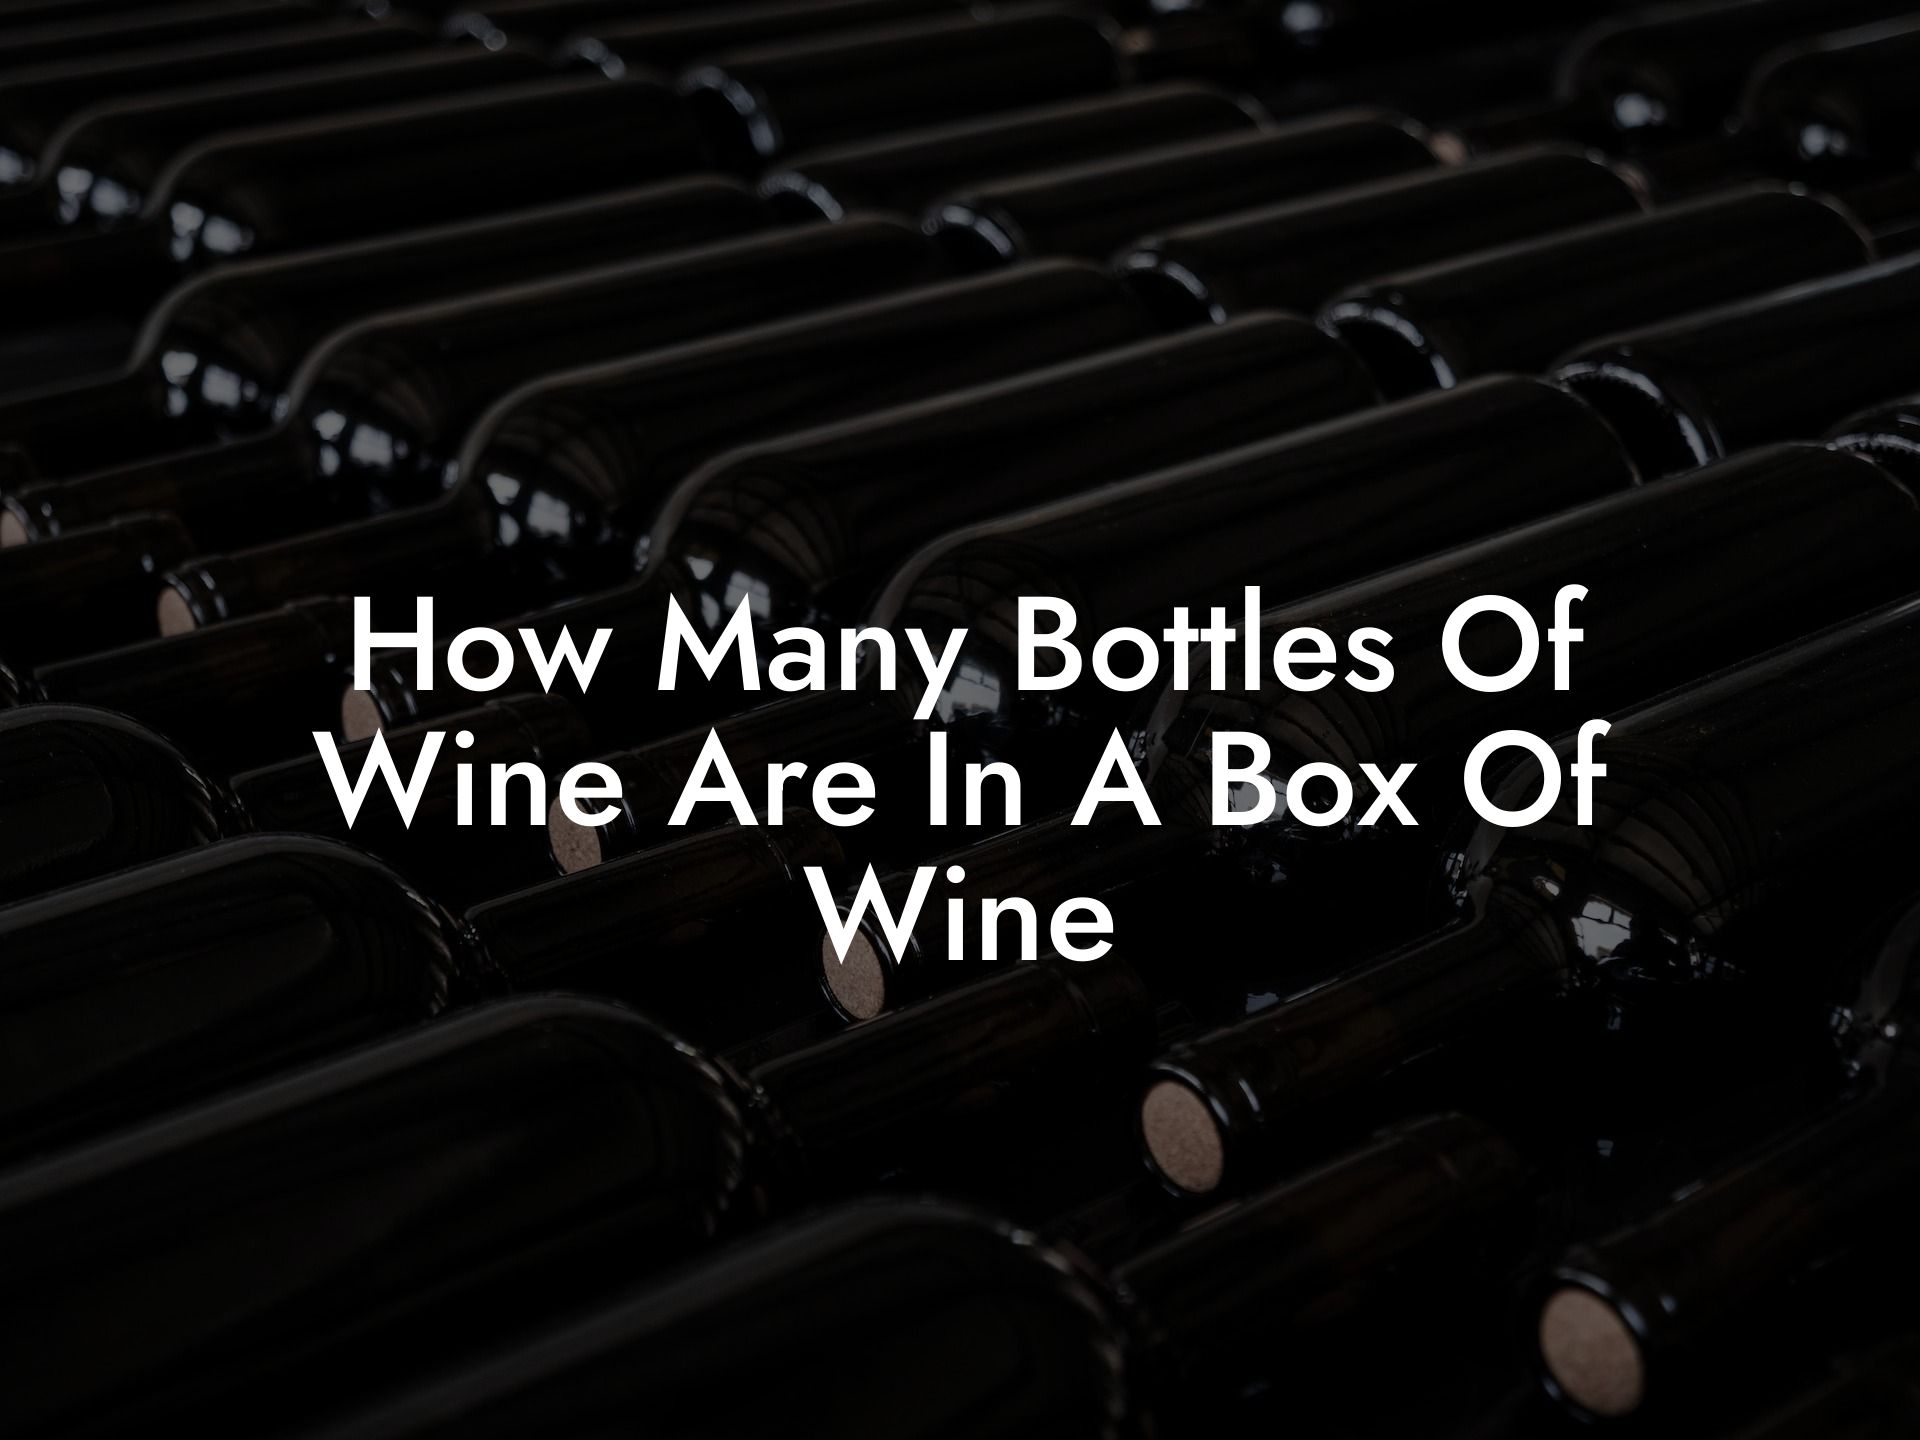 How Many Bottles Of Wine Are In A Box Of Wine